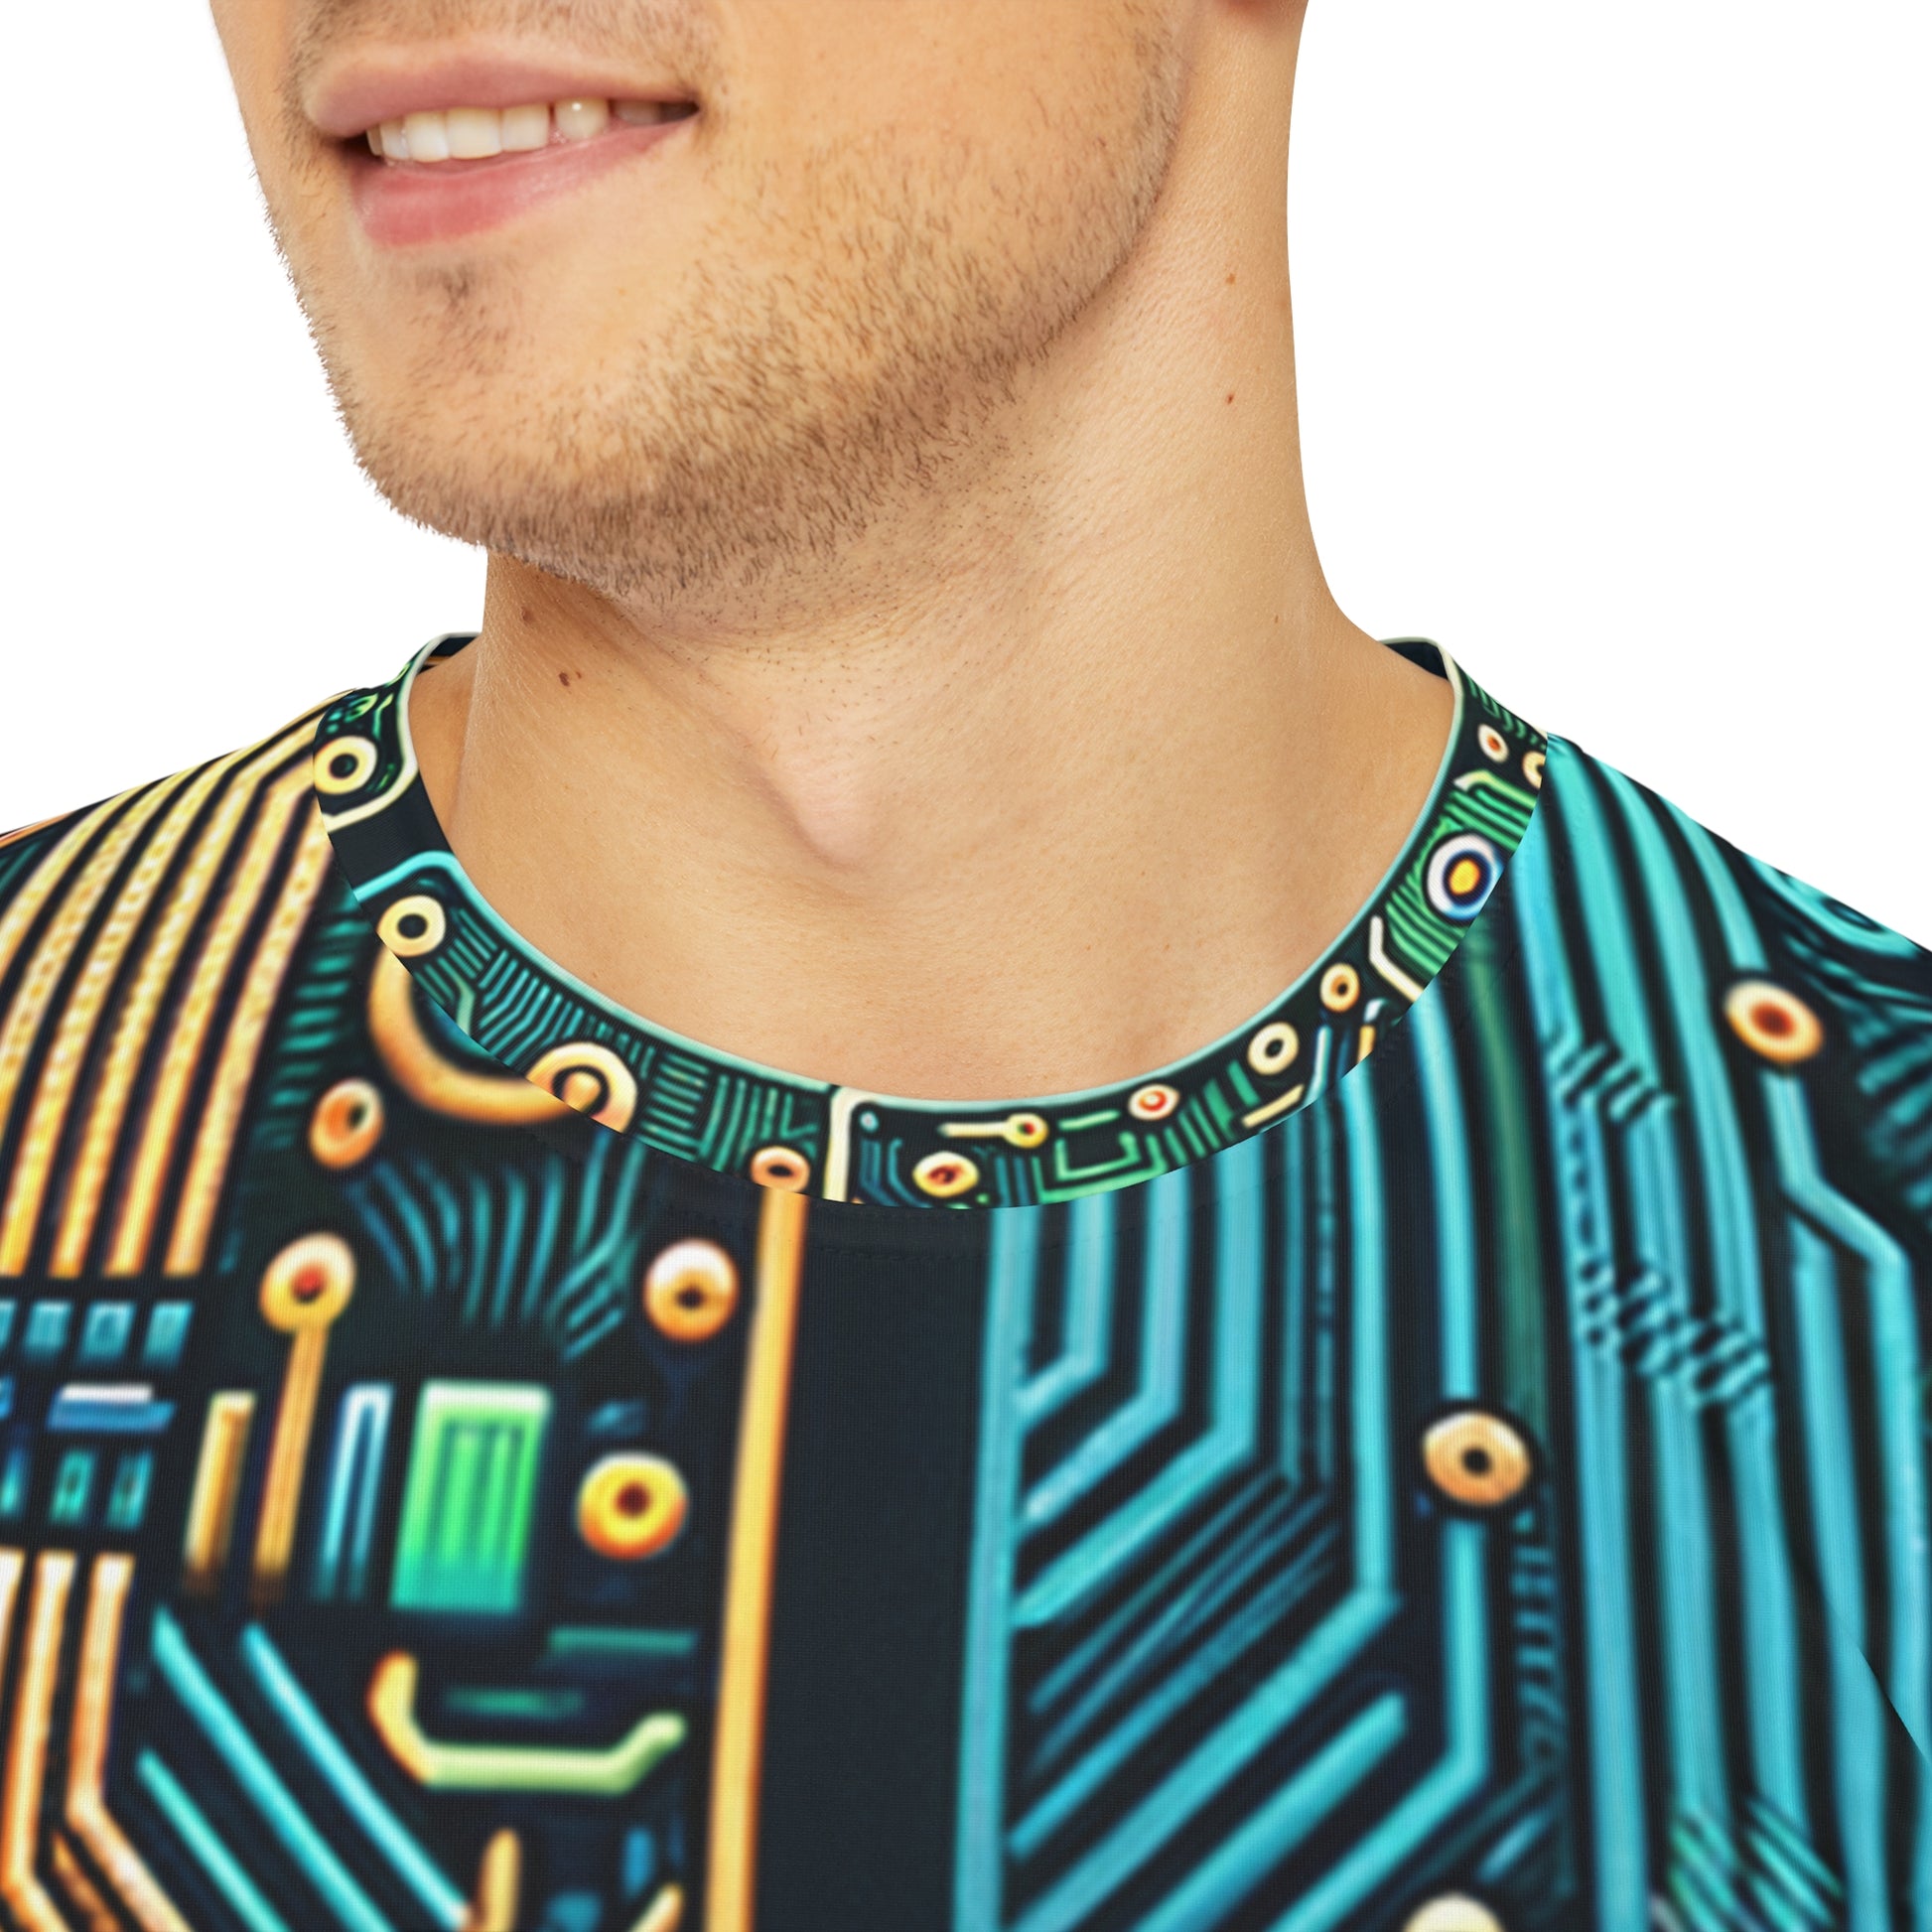 Close-up shot of the Circuit Synapse Array Crewneck Pullover All-Over Print Short-Sleeved Shirt blue green yellow black white circuit pattern worn by a white man